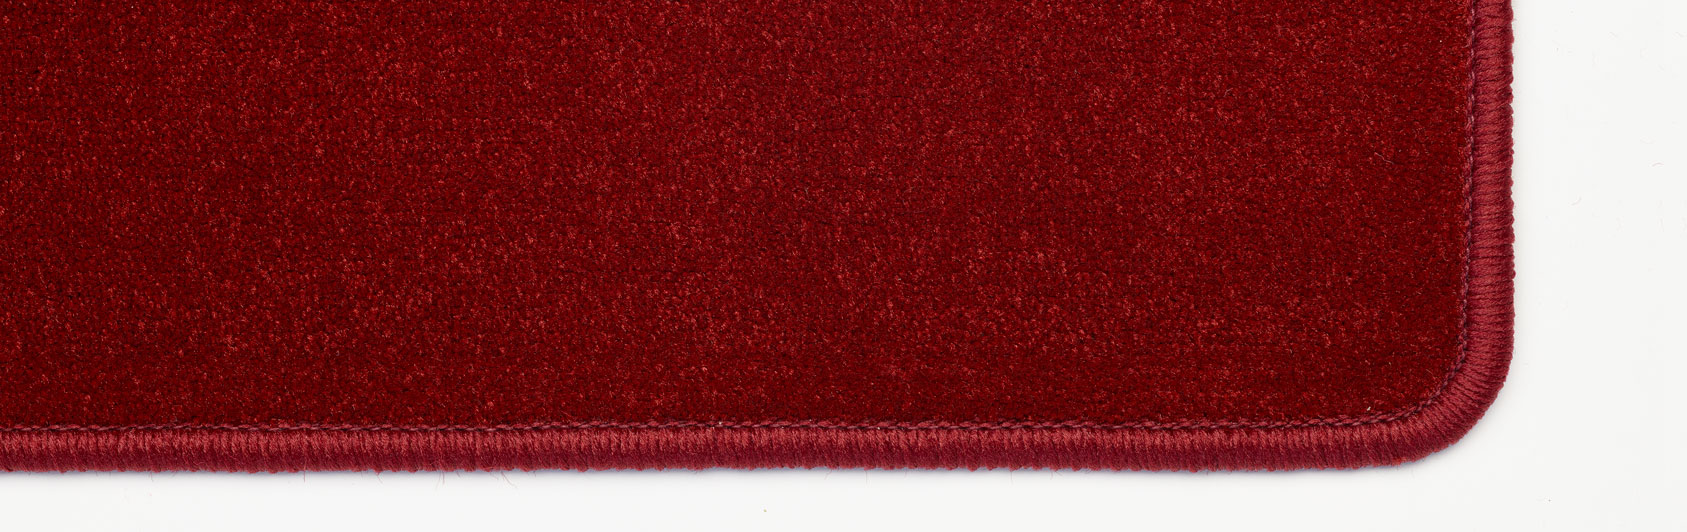 Kirchenteppich Capitol Farbcode 12-349 Farbe rot